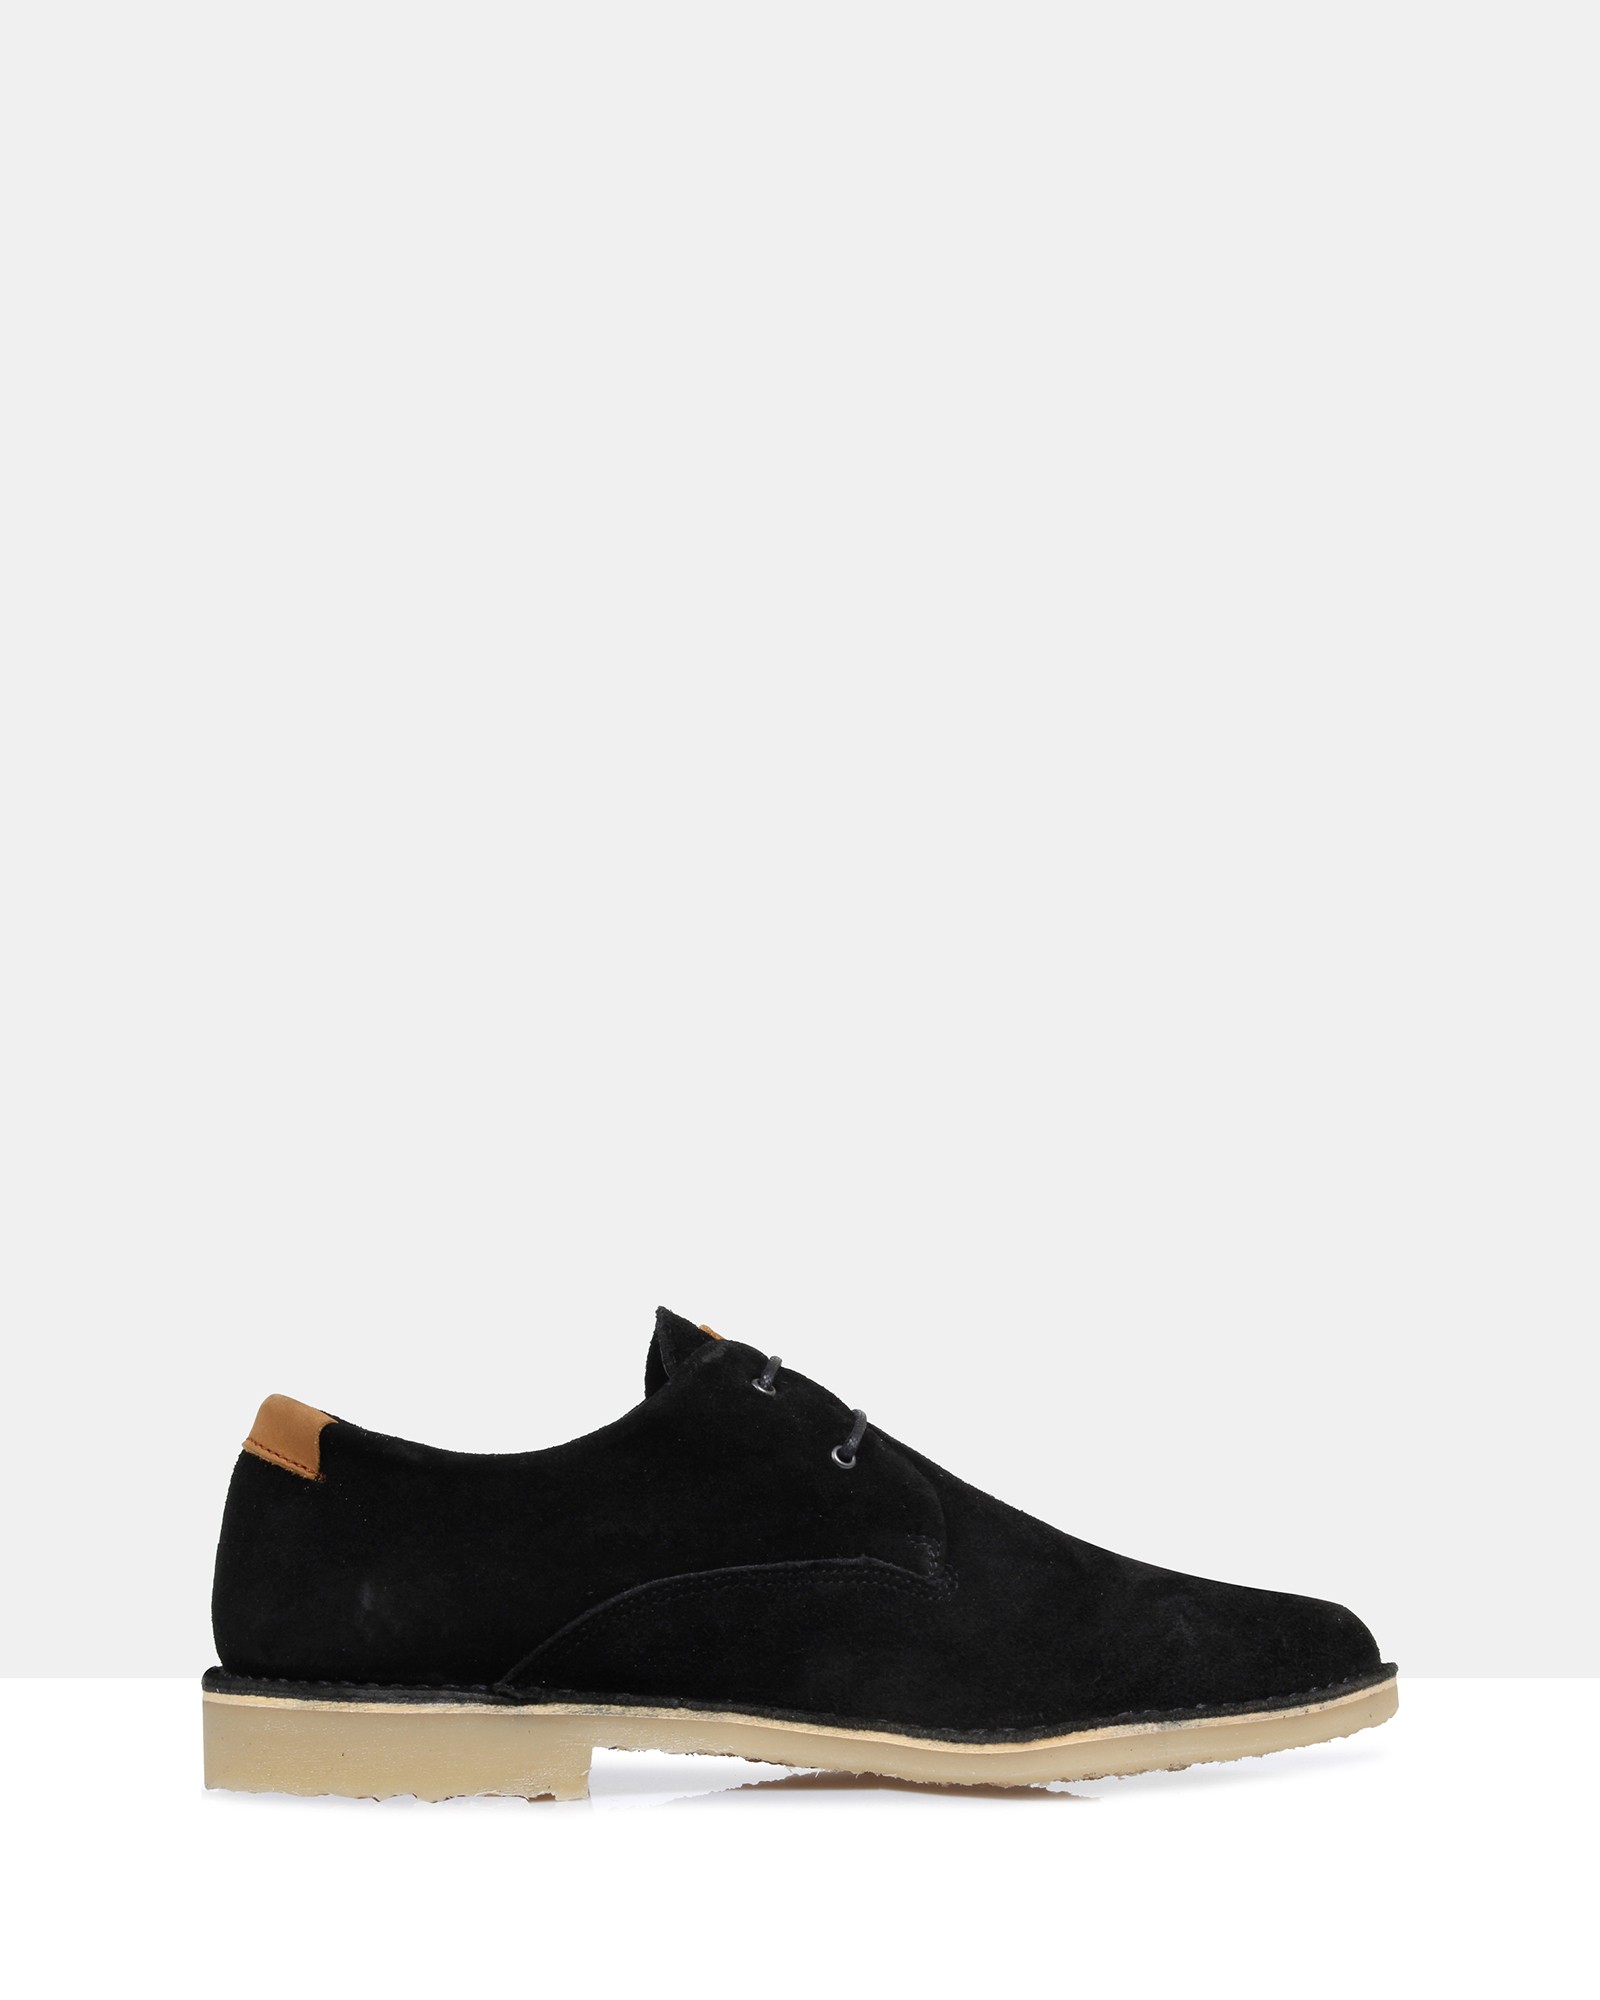 Angus Suede Lace Ups Black by Brando | ShoeSales